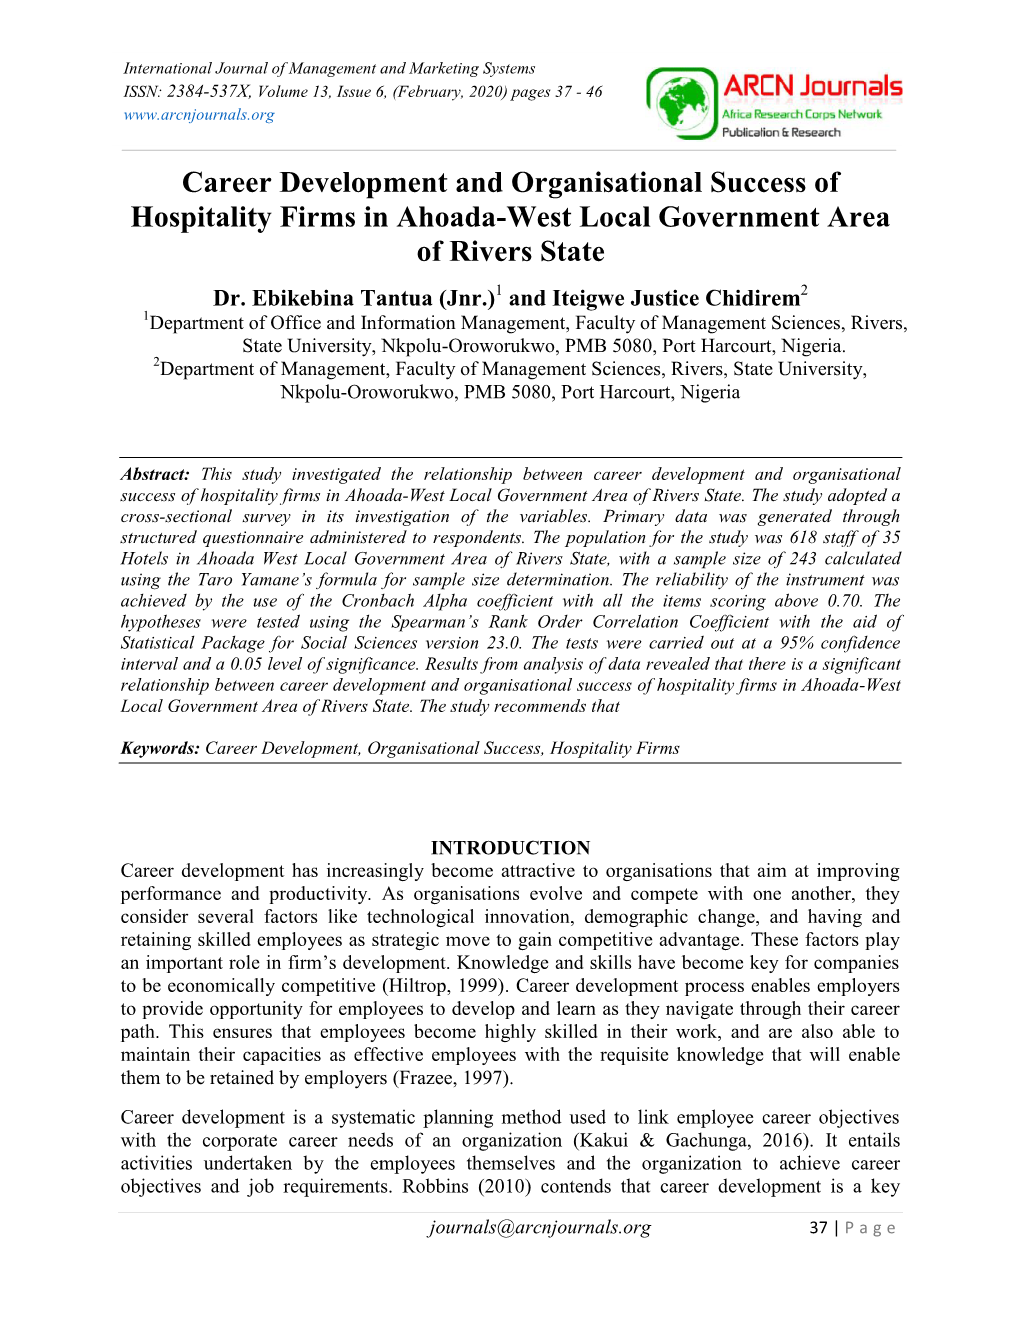 Career Development and Organisational Success of Hospitality Firms in Ahoada-West Local Government Area of Rivers State Dr